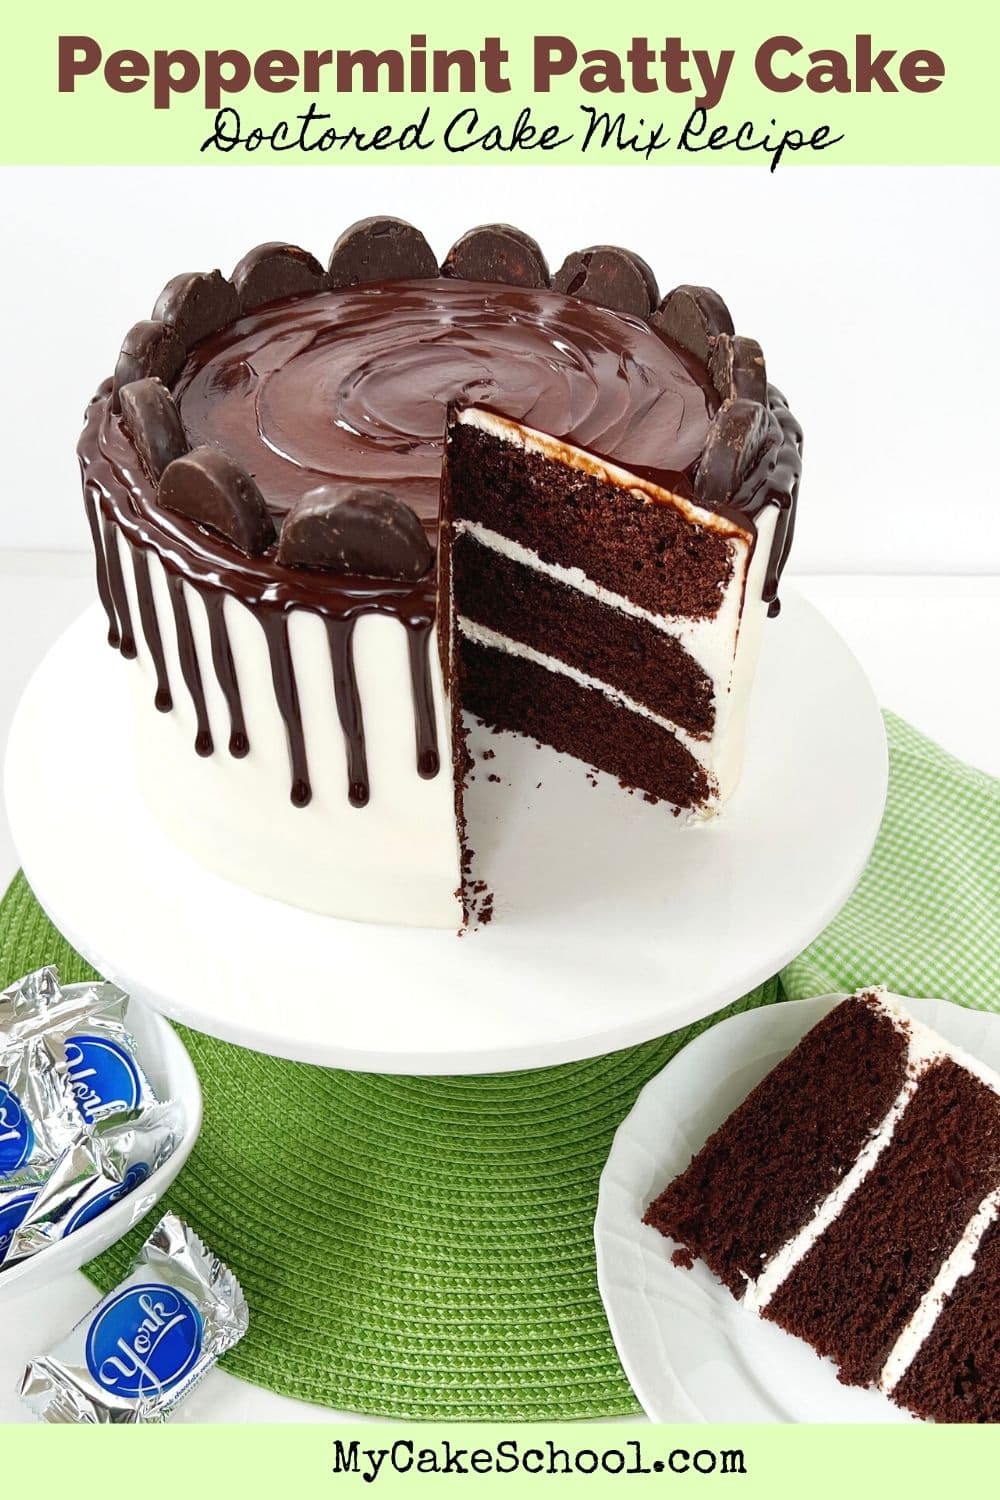 Peppermint Patty Cake- A Doctored Cake Mix Recipe